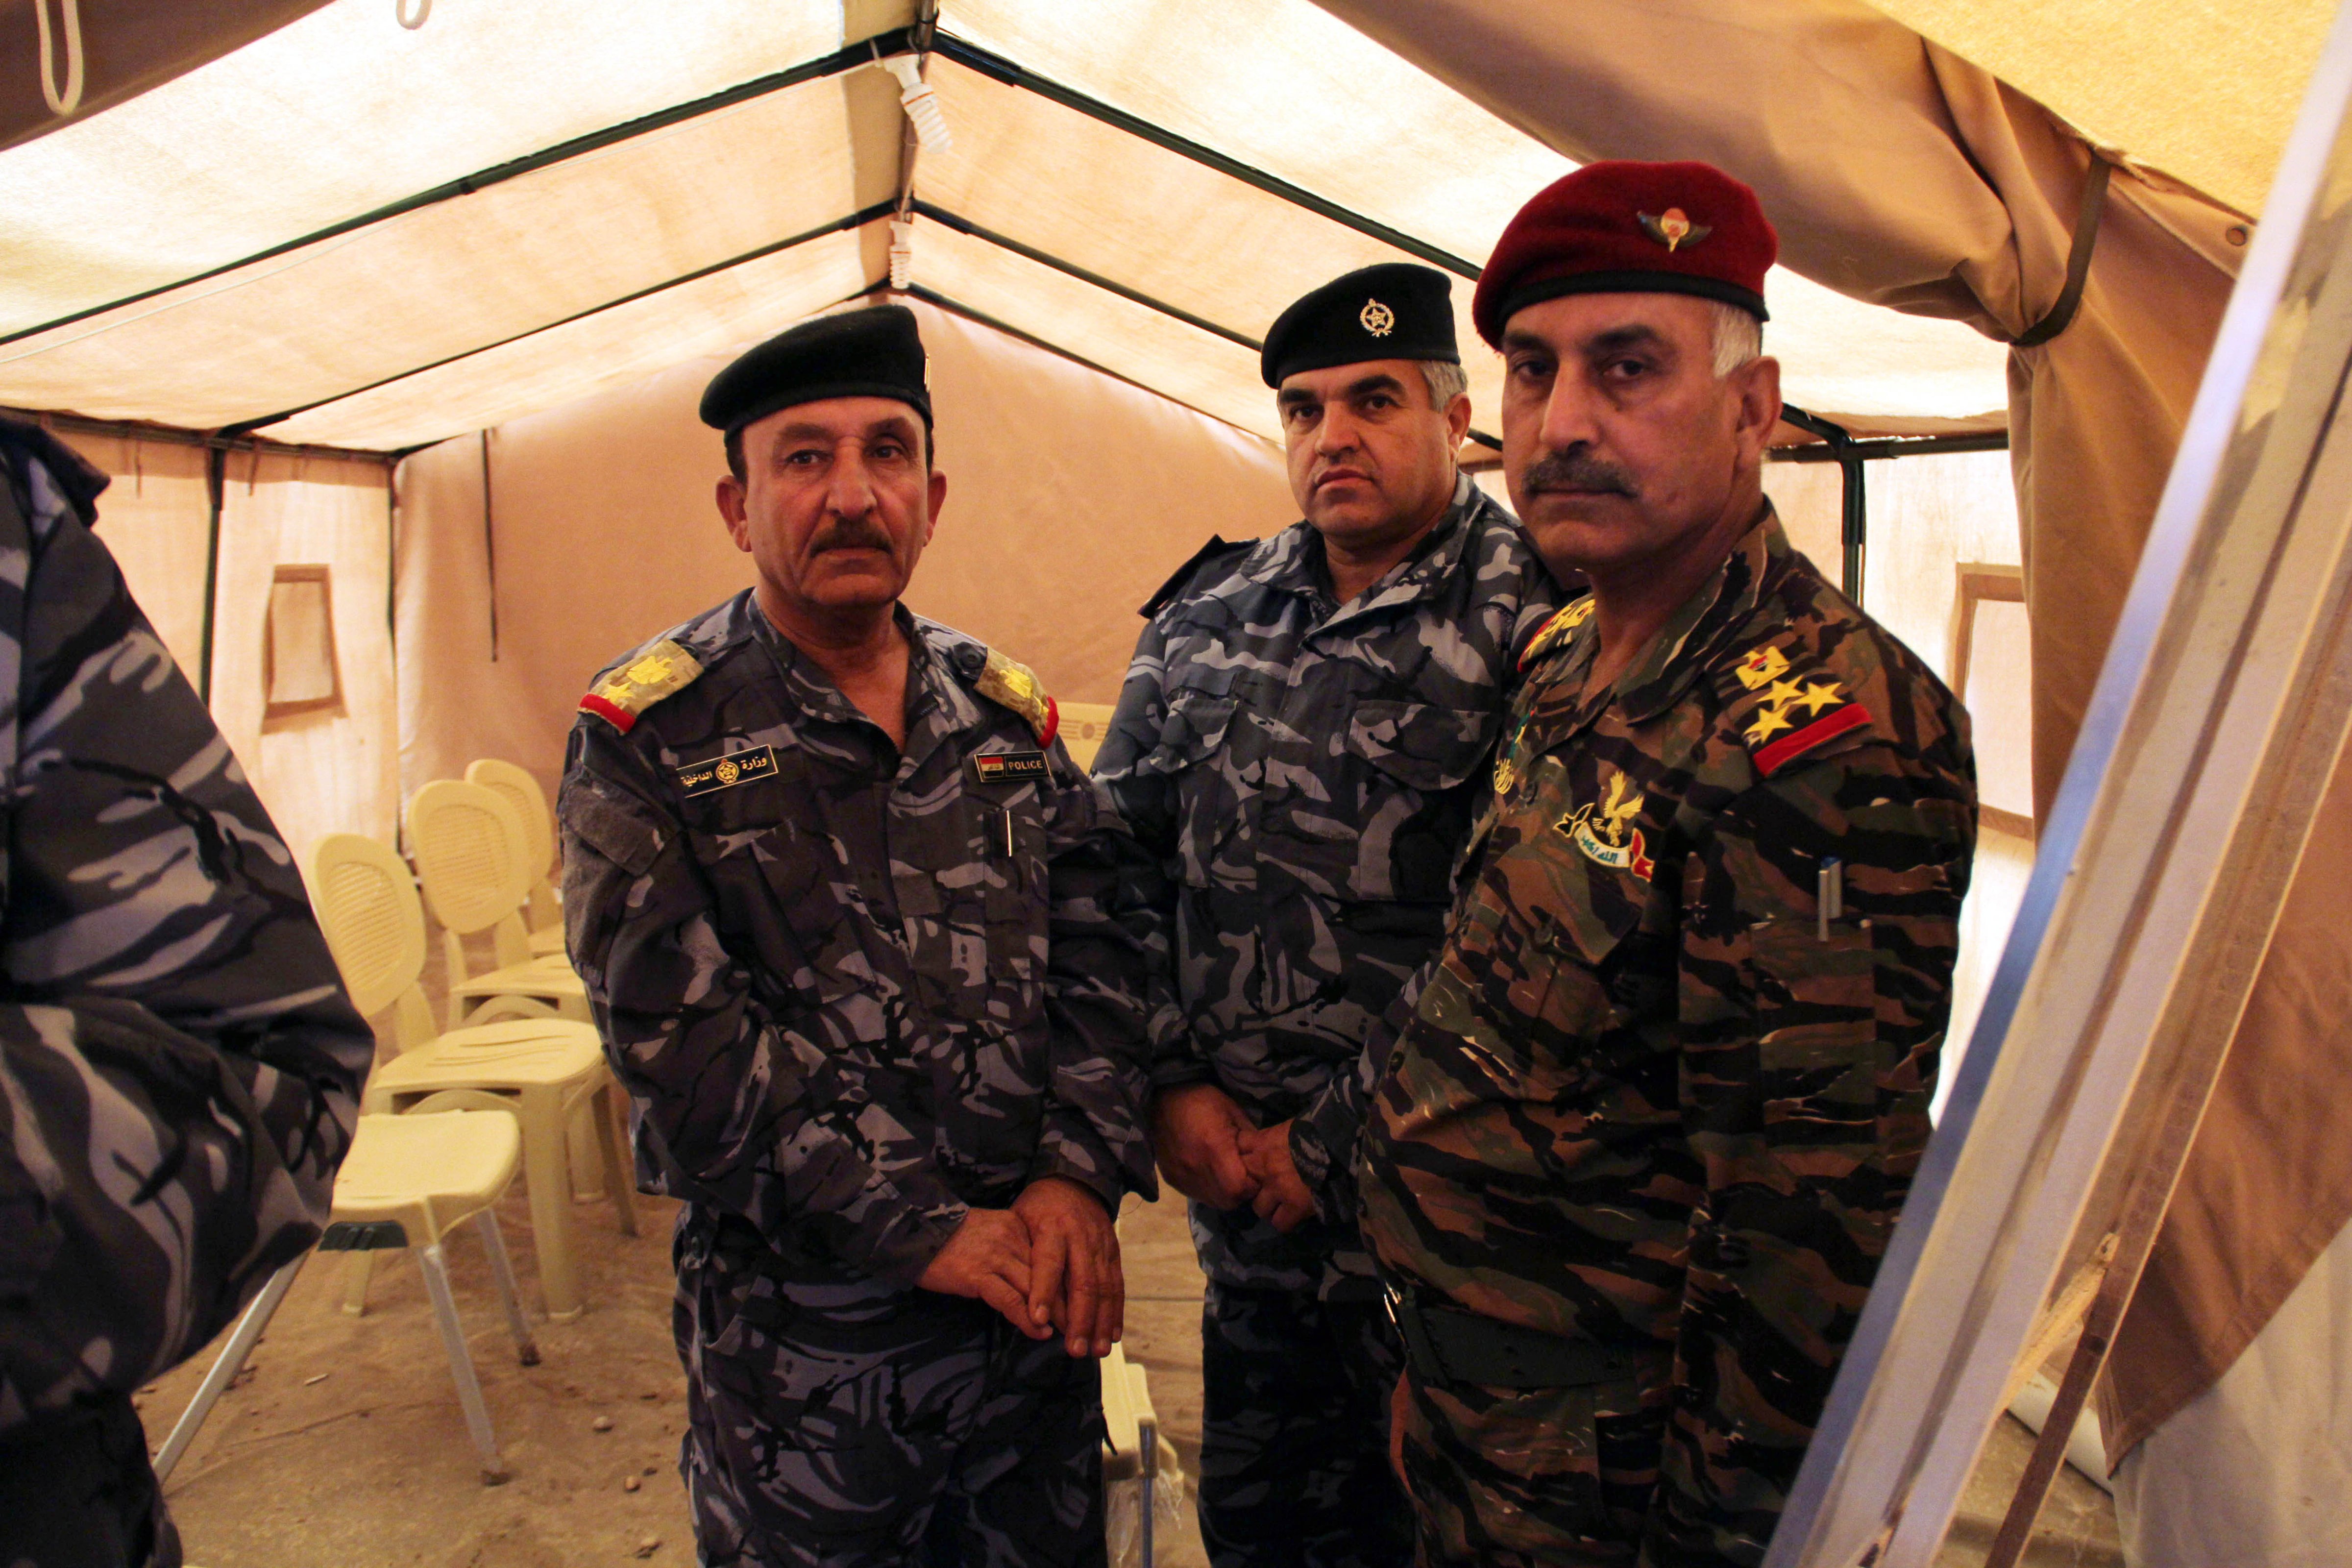 Moshir Al-Jabour (left) in a training camp for police from Mosul. (Rebecca Collard)